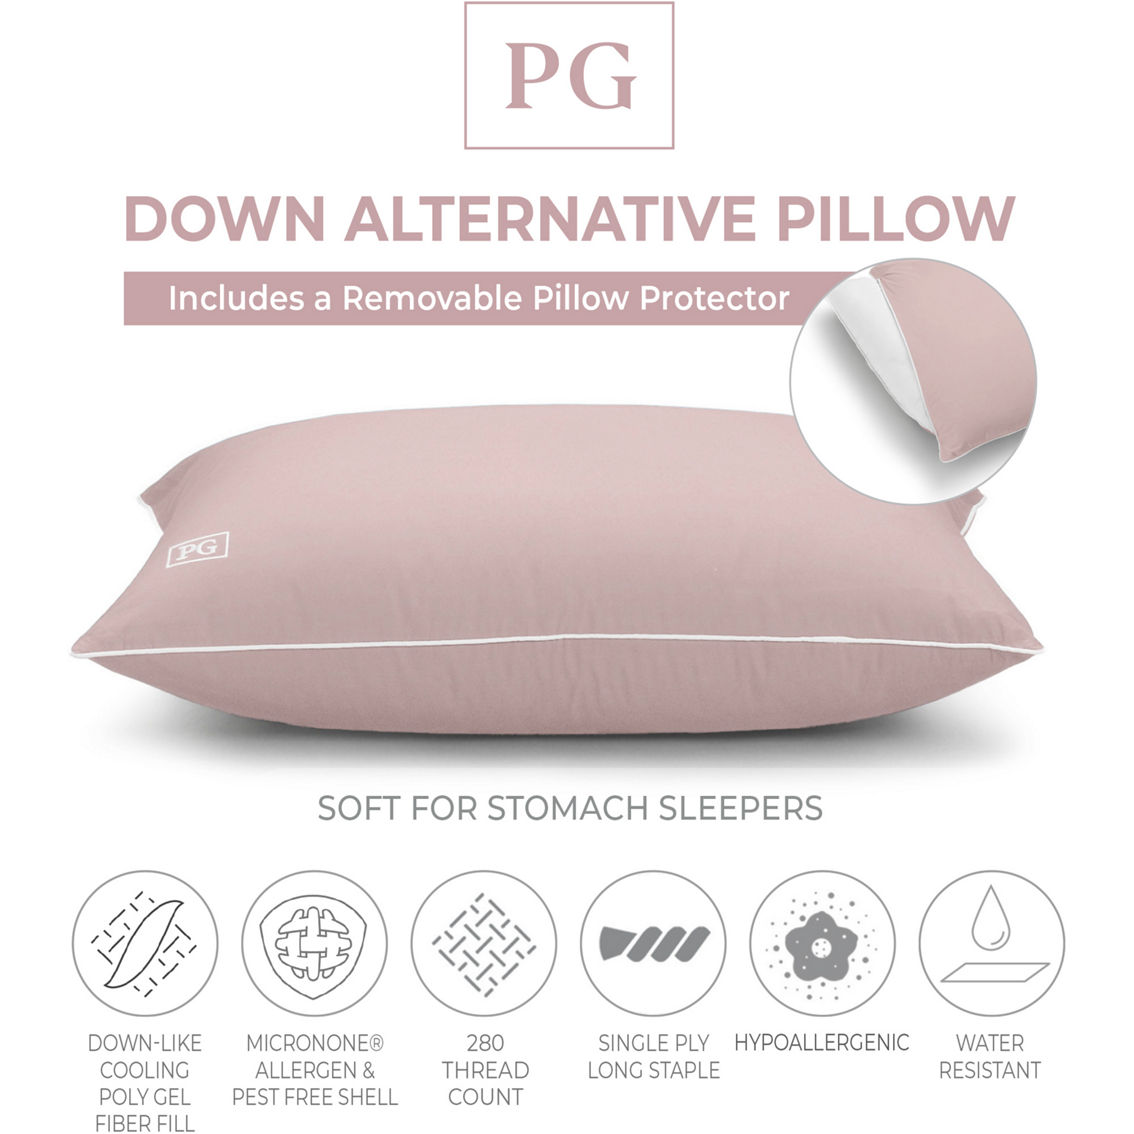 Pillow Gal Soft Down Alternative Pillow with Removable Pillow Protector - Image 3 of 4